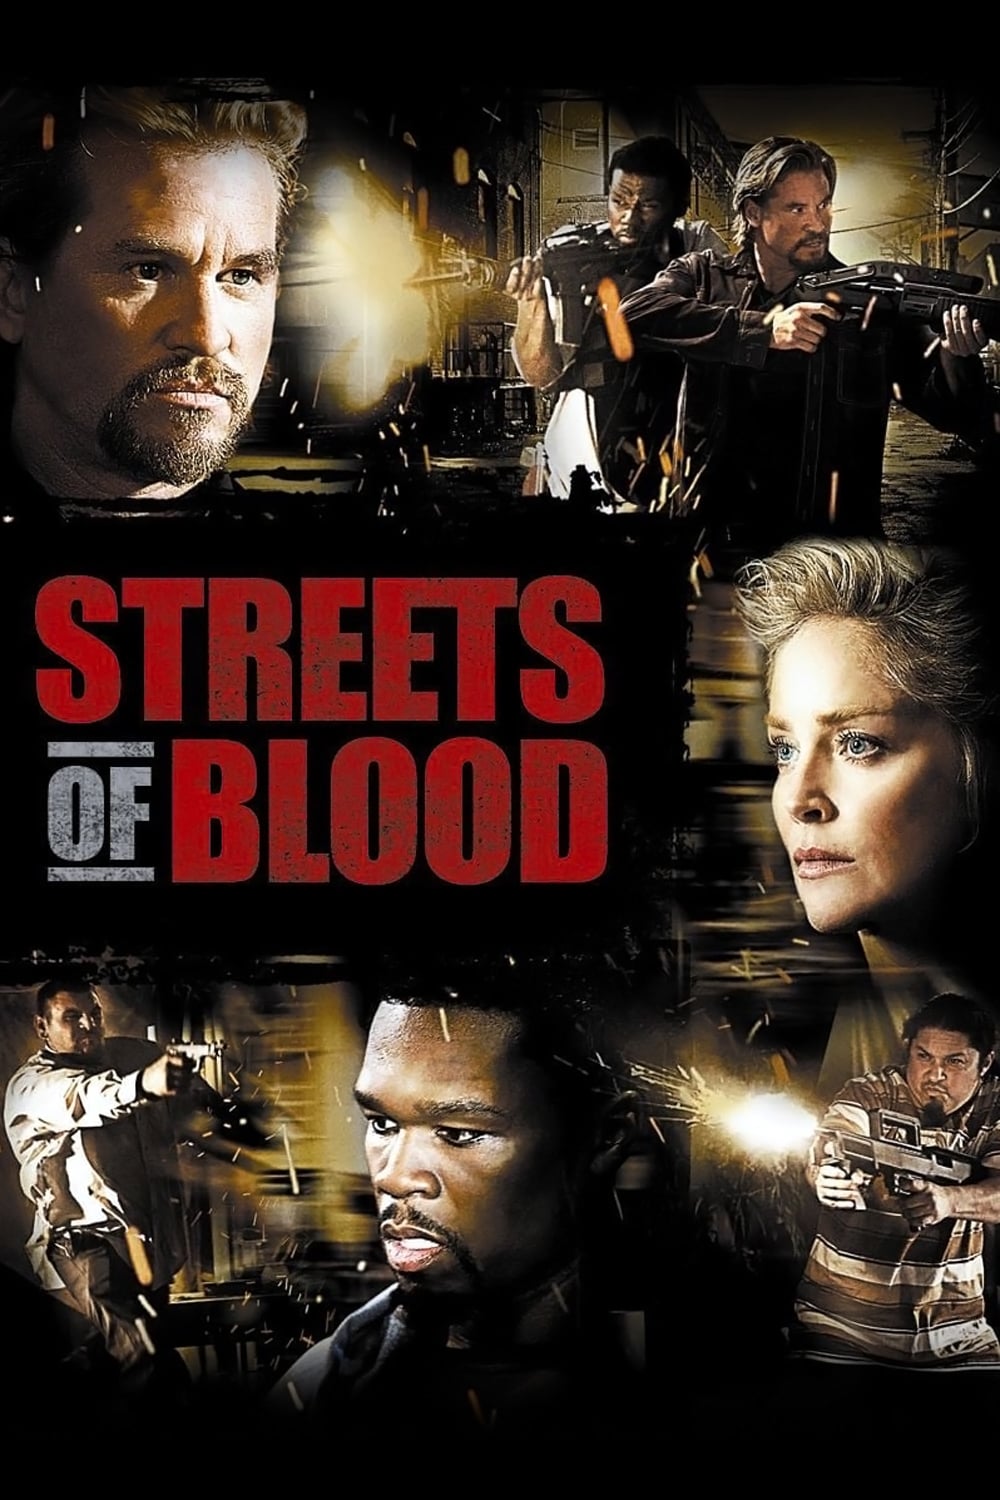 Streets of Blood [HD] (2009)